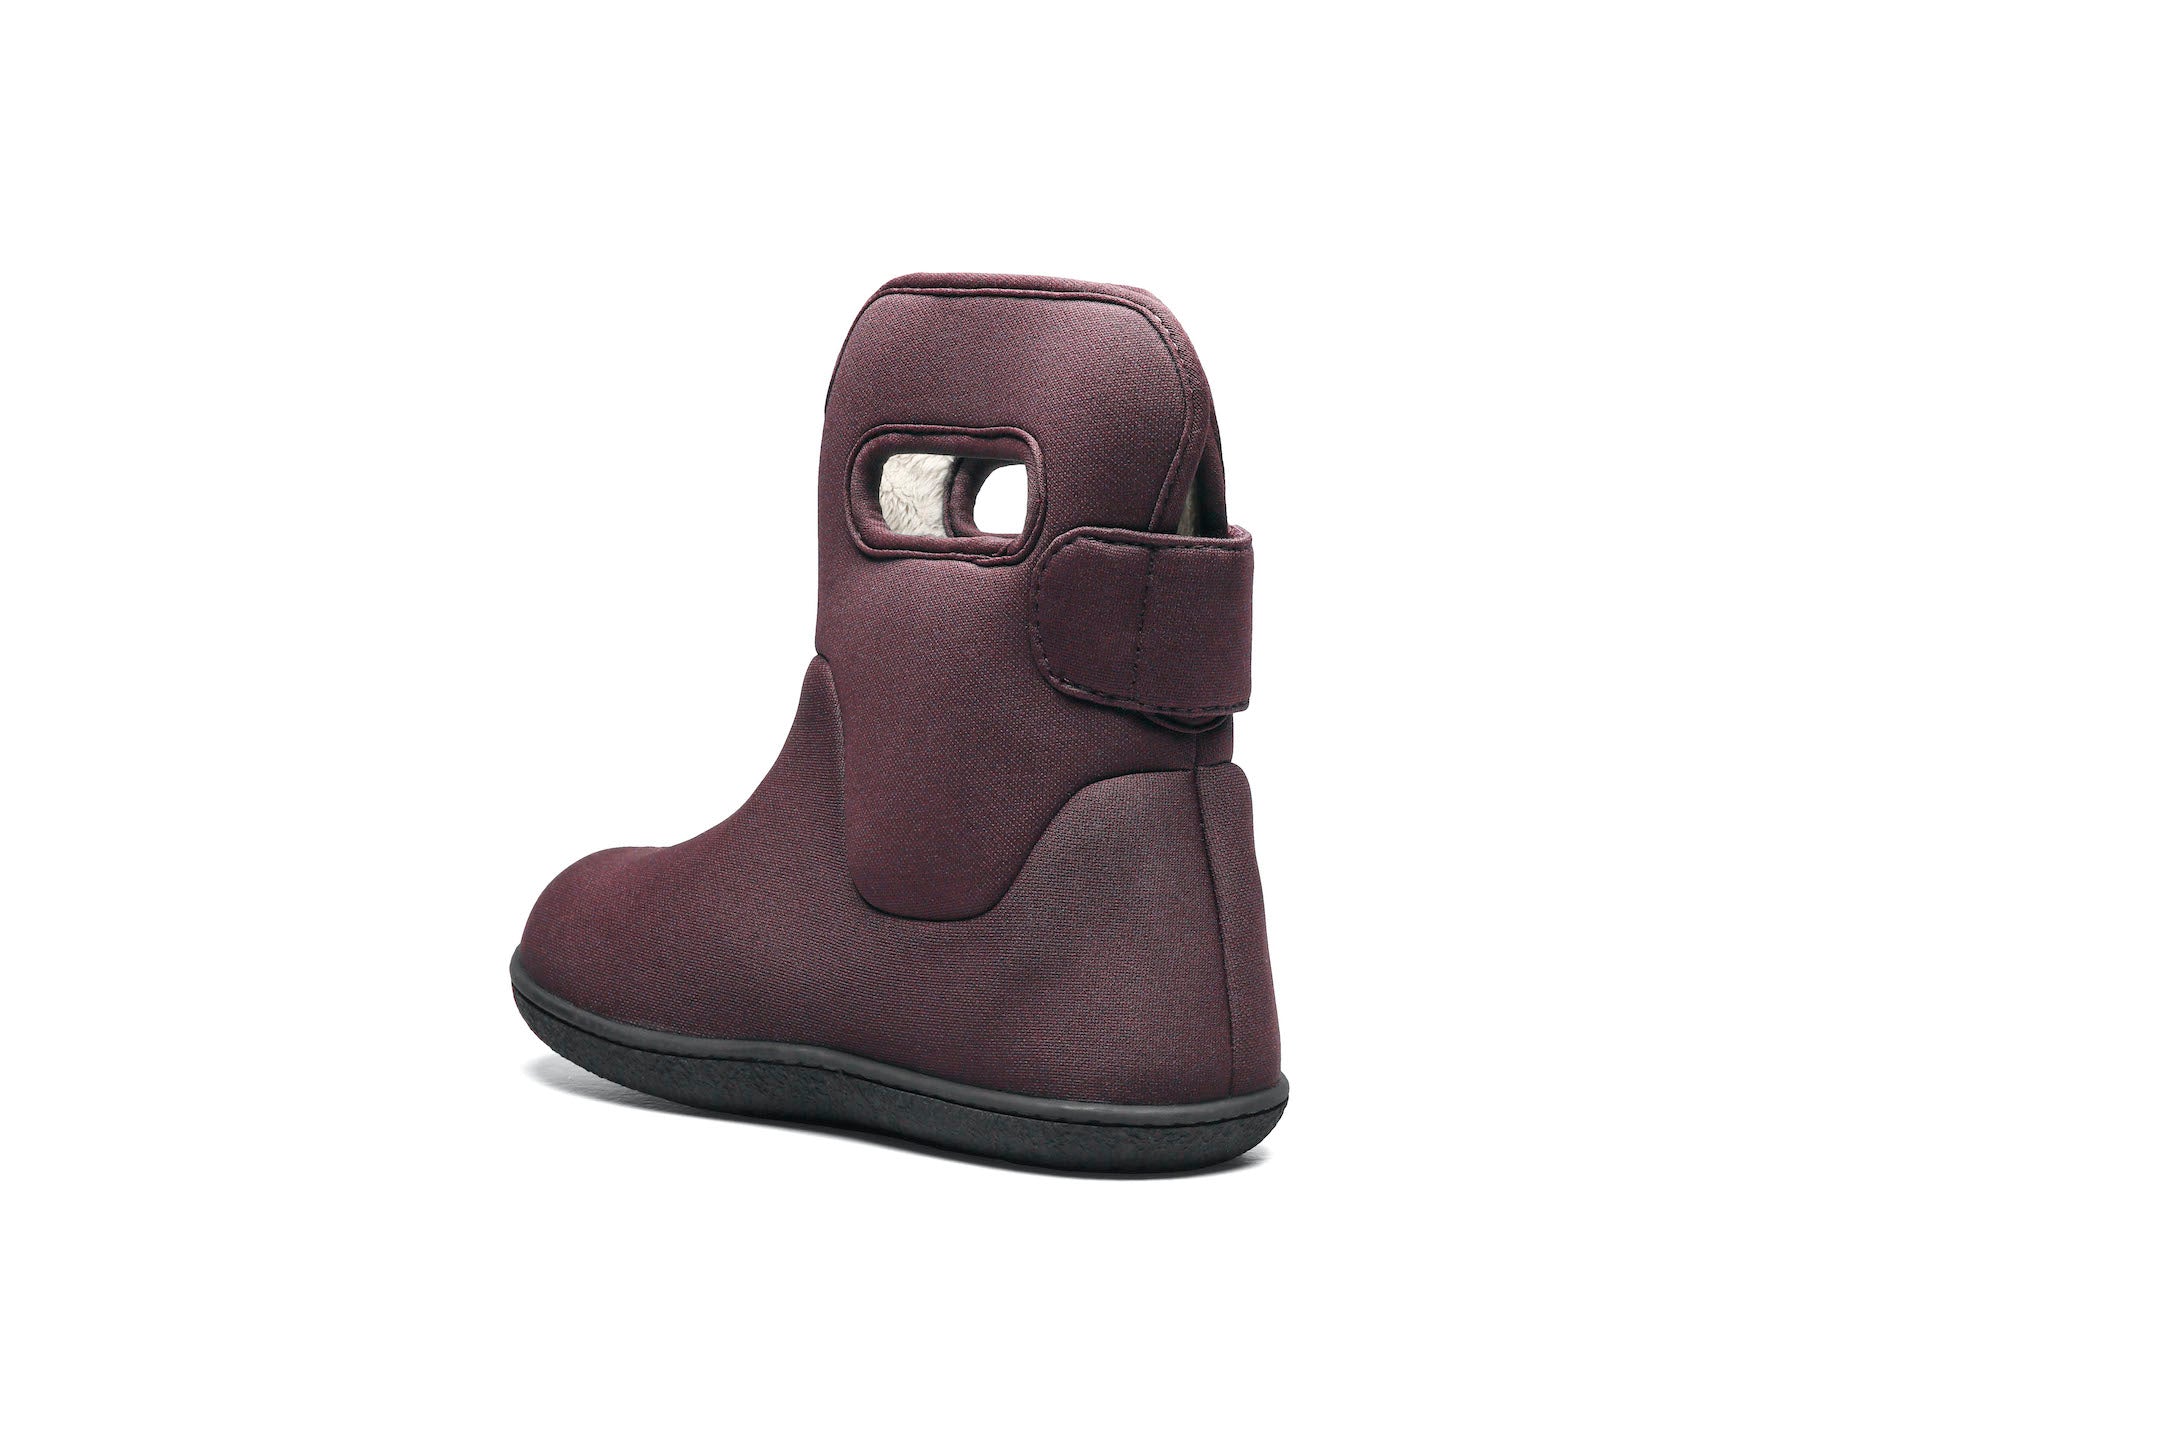 Bogs Youngster Solid Kids Plum Waterproof Wellington Boots